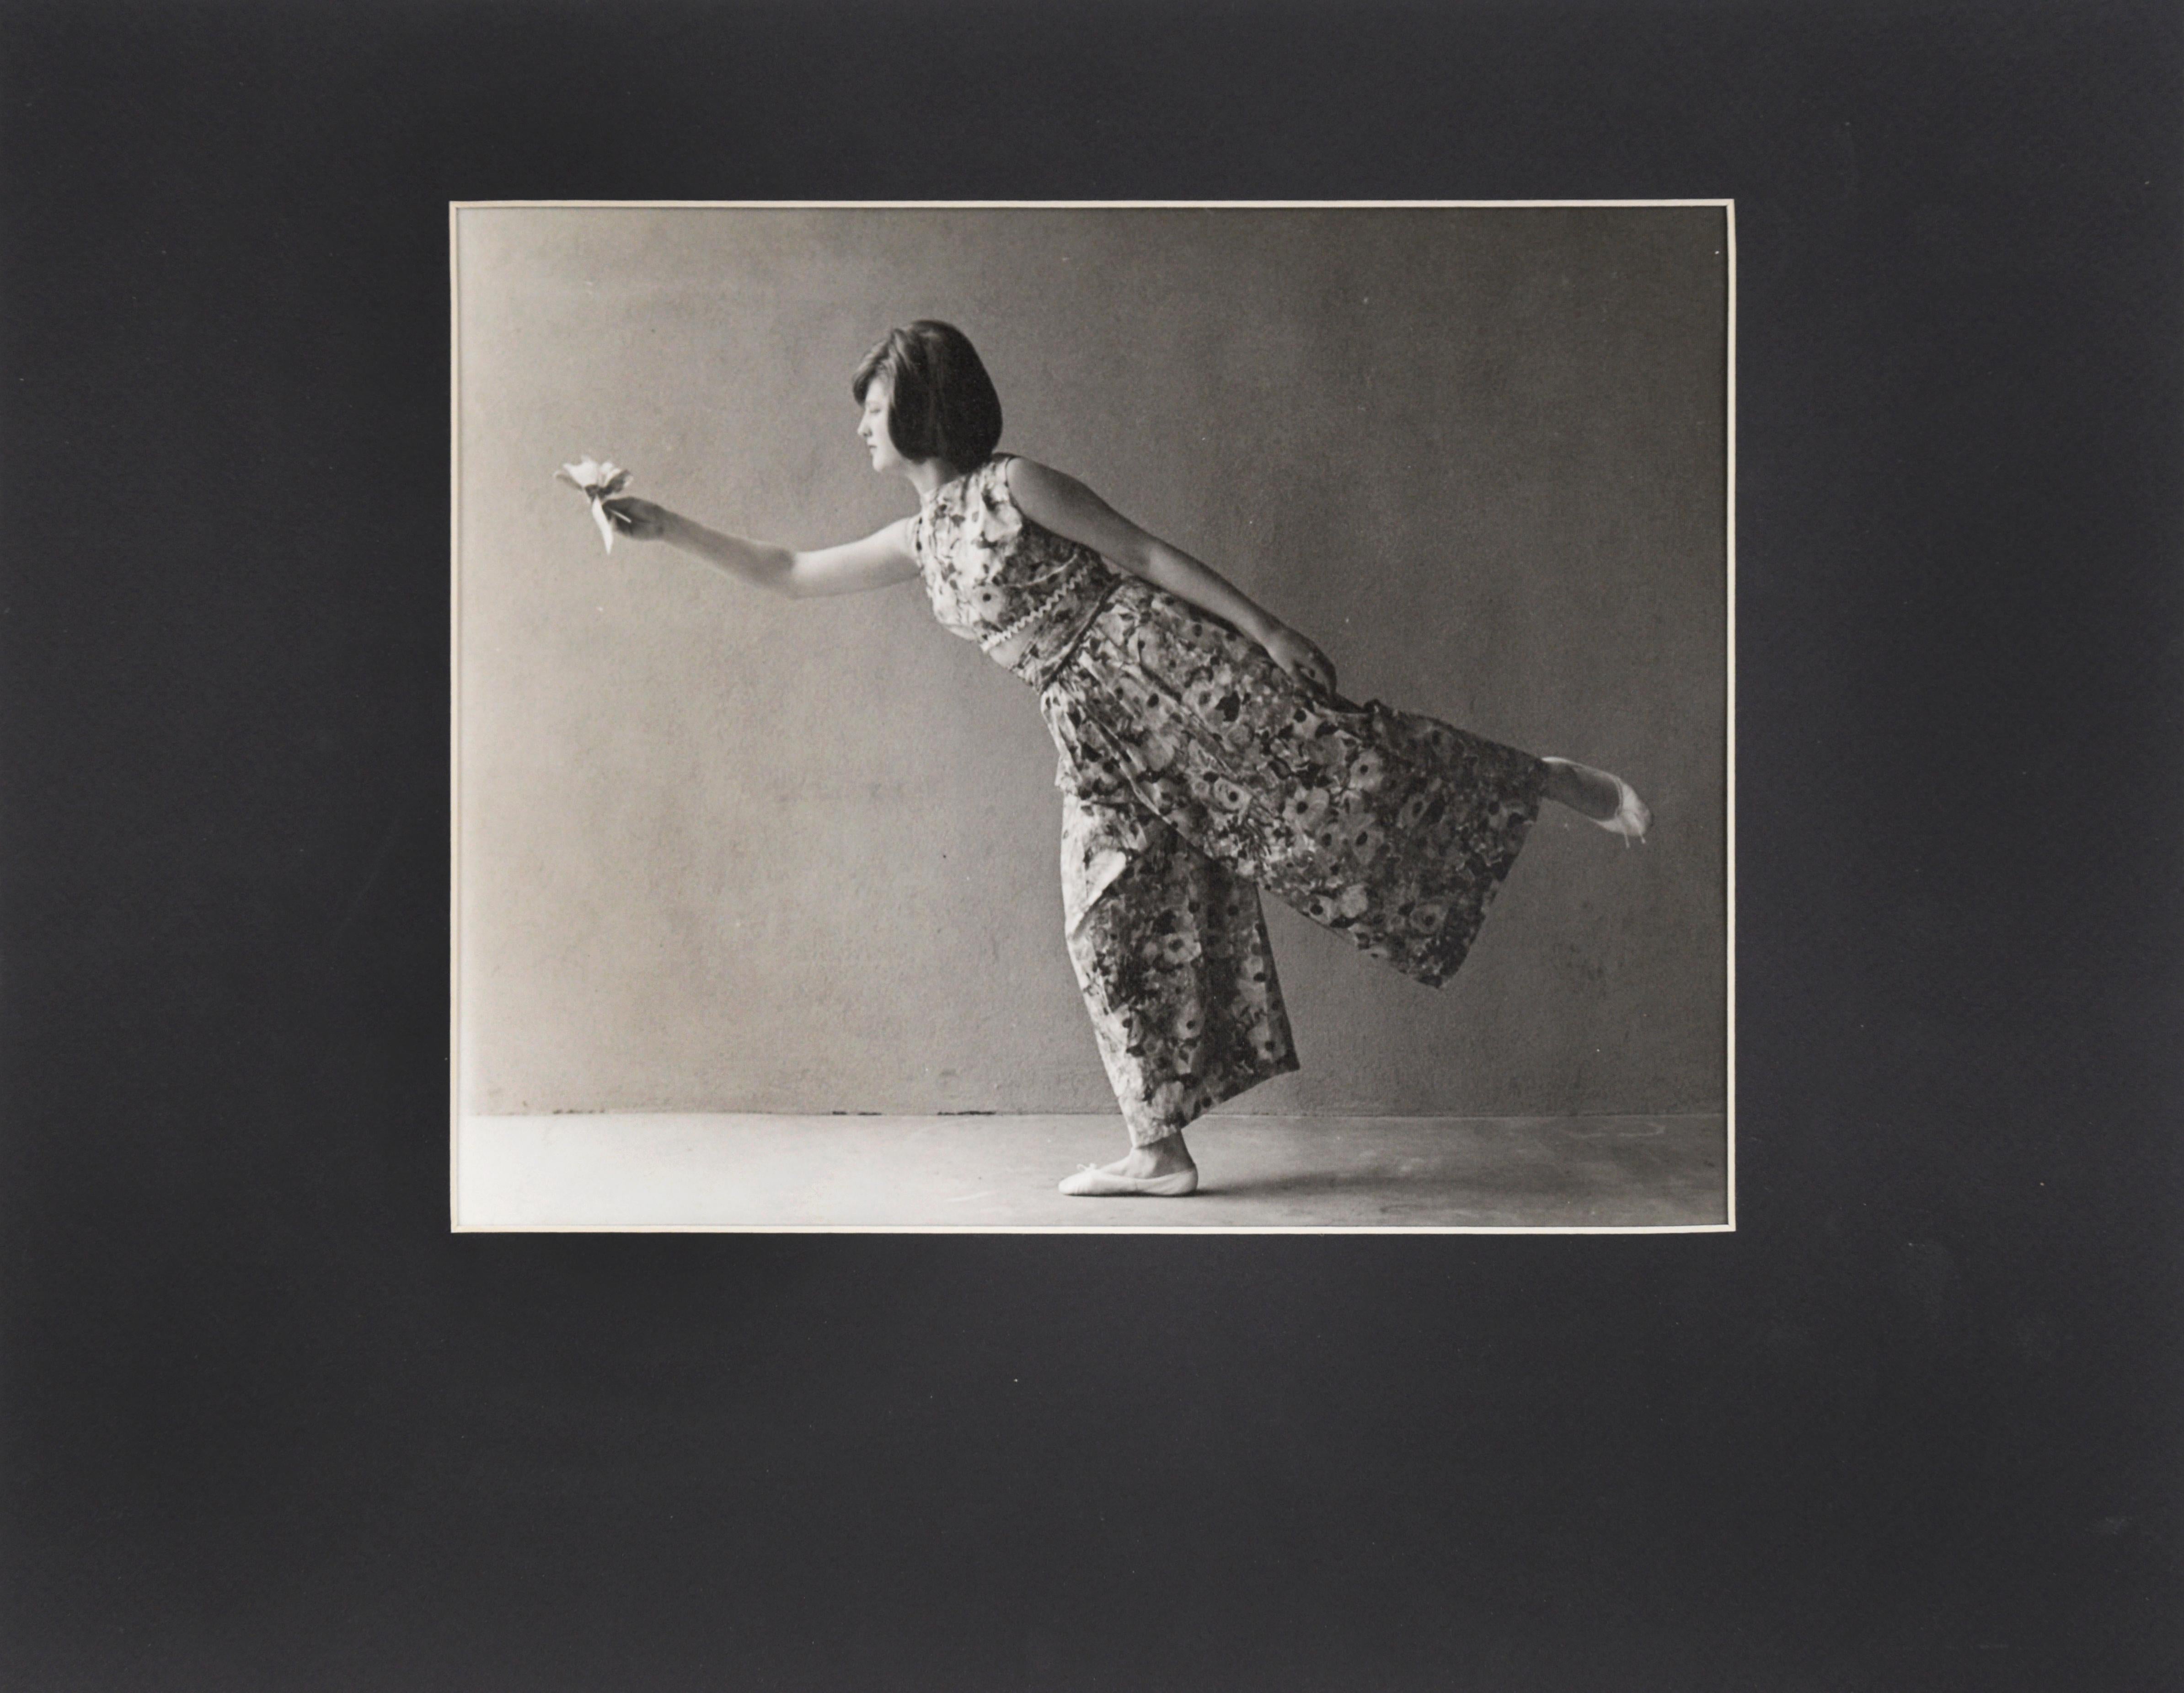 Woman In Ballet Pose Holding a Flower - San Francisco Richard Edwards

A brunette woman poses, standing on her left leg with her hand out holding a flower.
A collection of photographs from the studio presentation portfolio by Richard Edwards